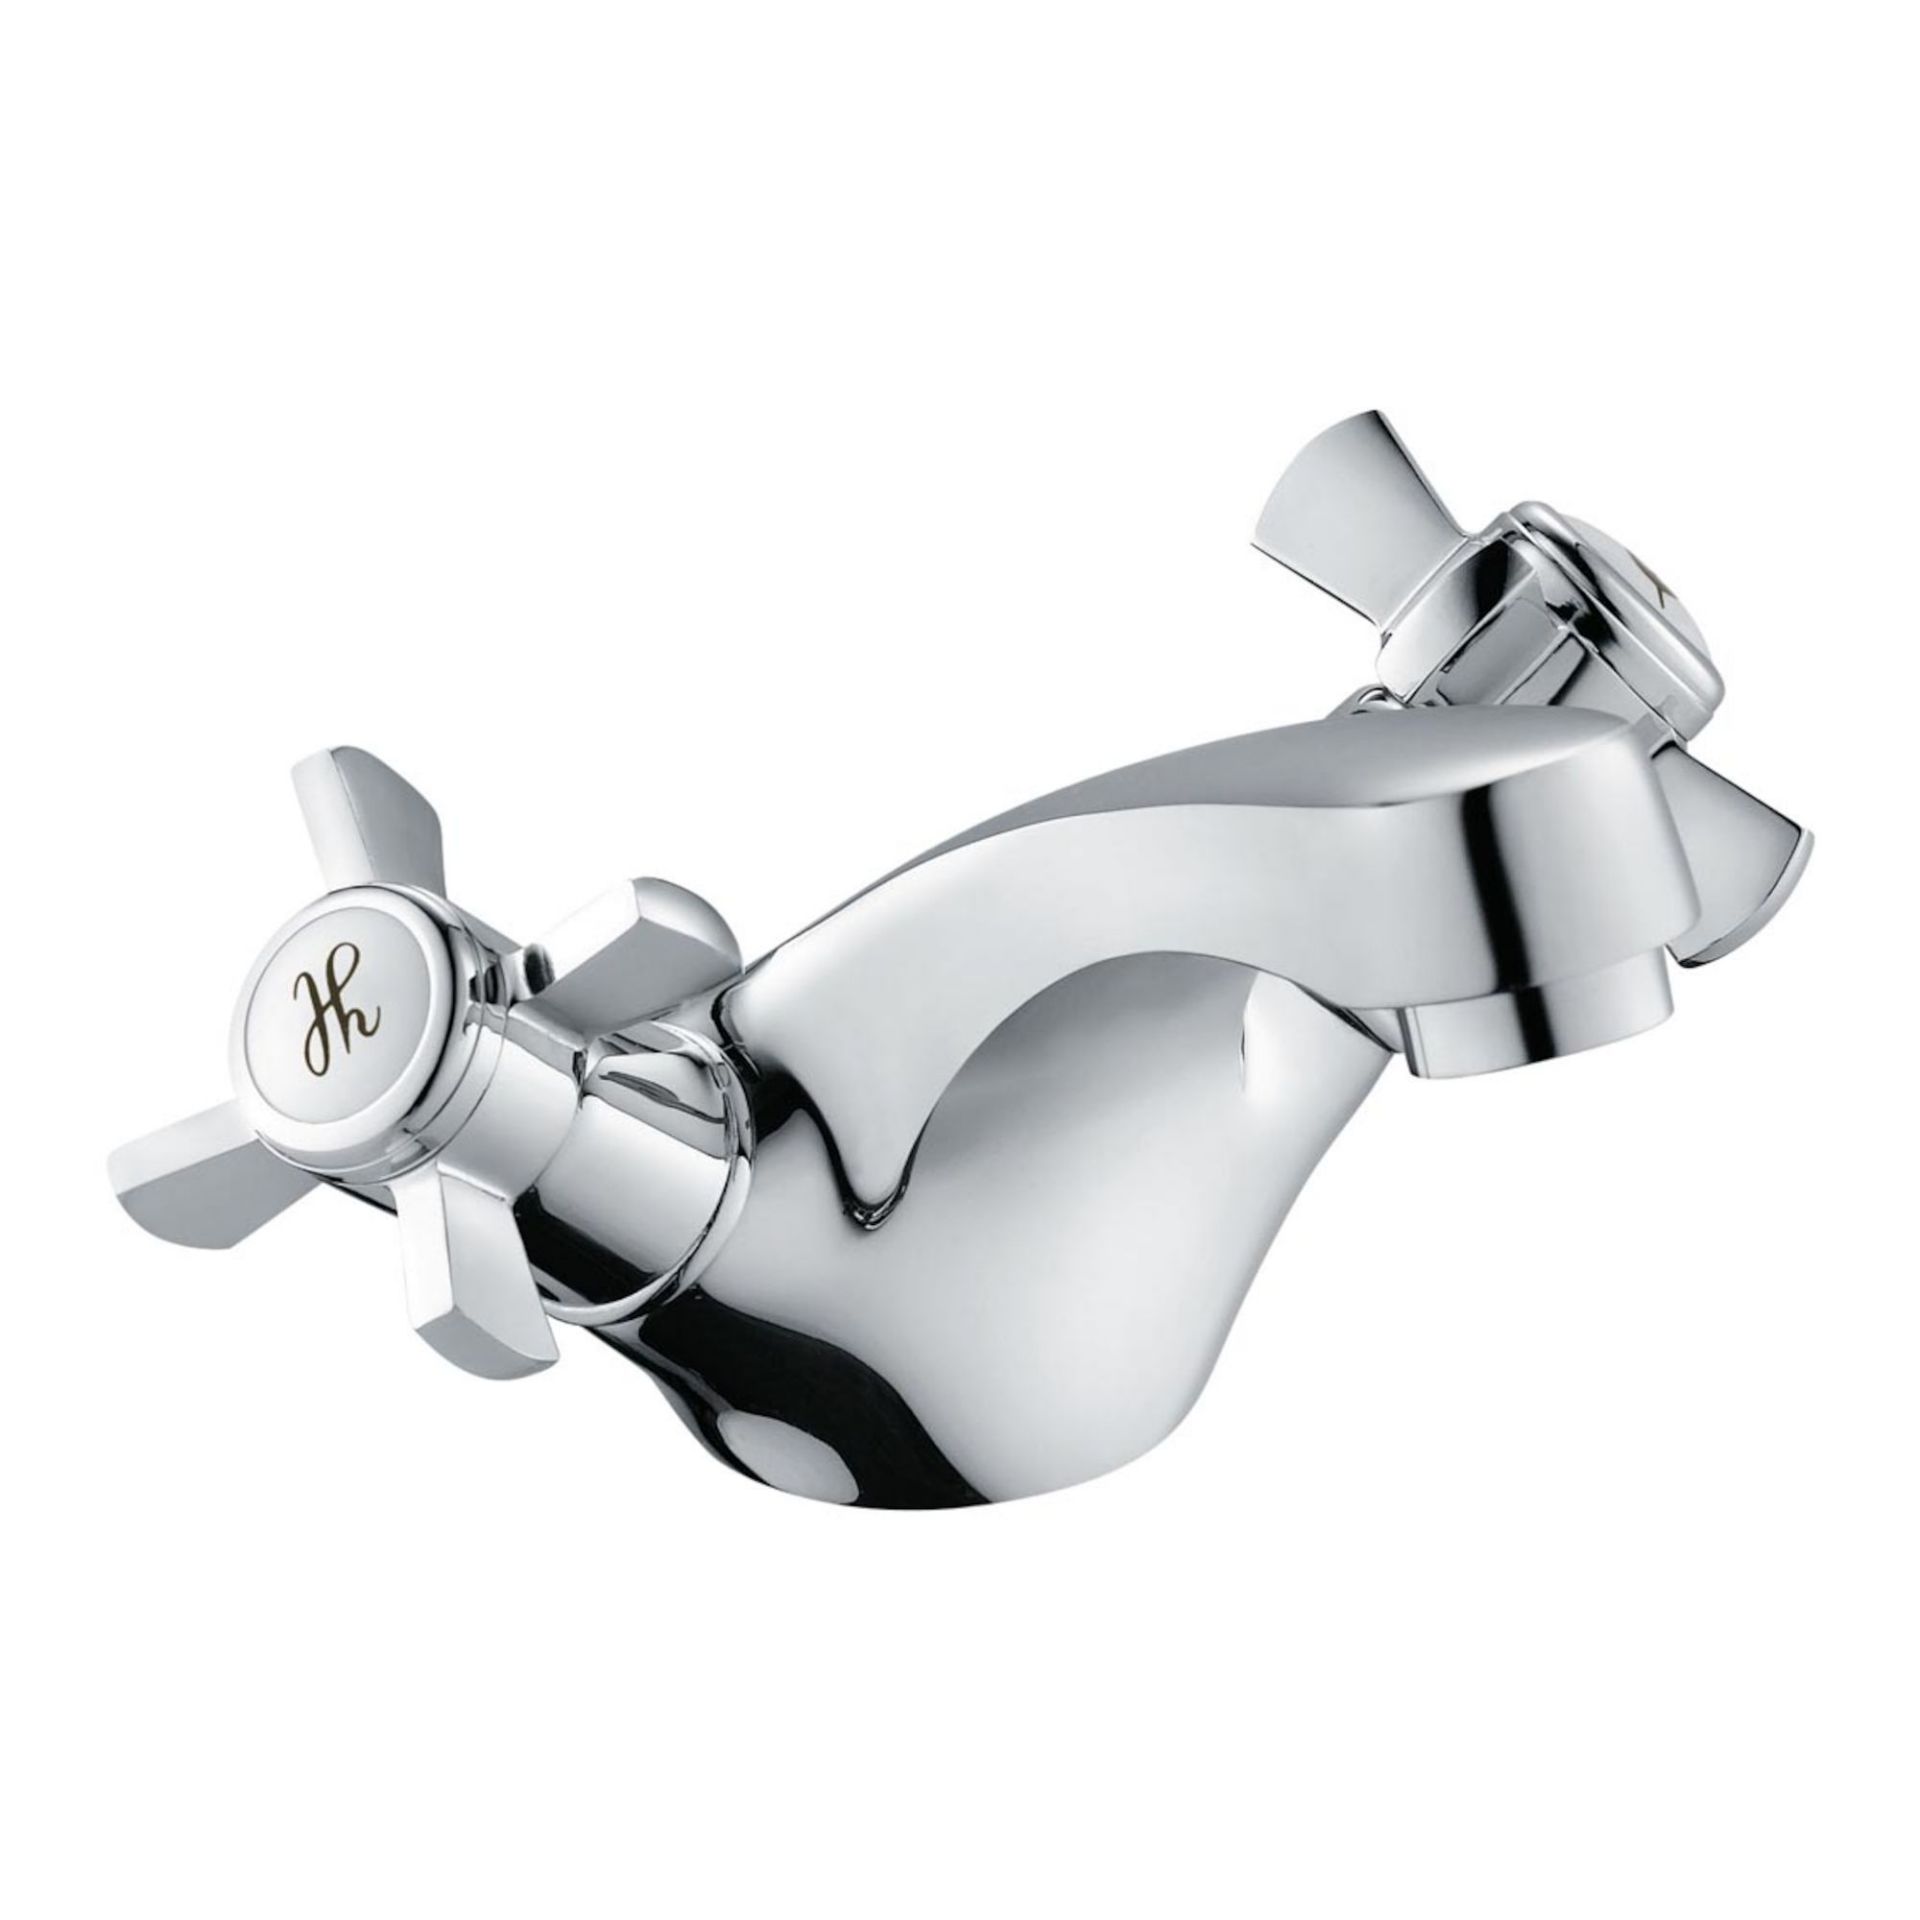 (EW152) Loxley Traditional Basin Mixer Tap Engineered from premium solid brass which is layered in